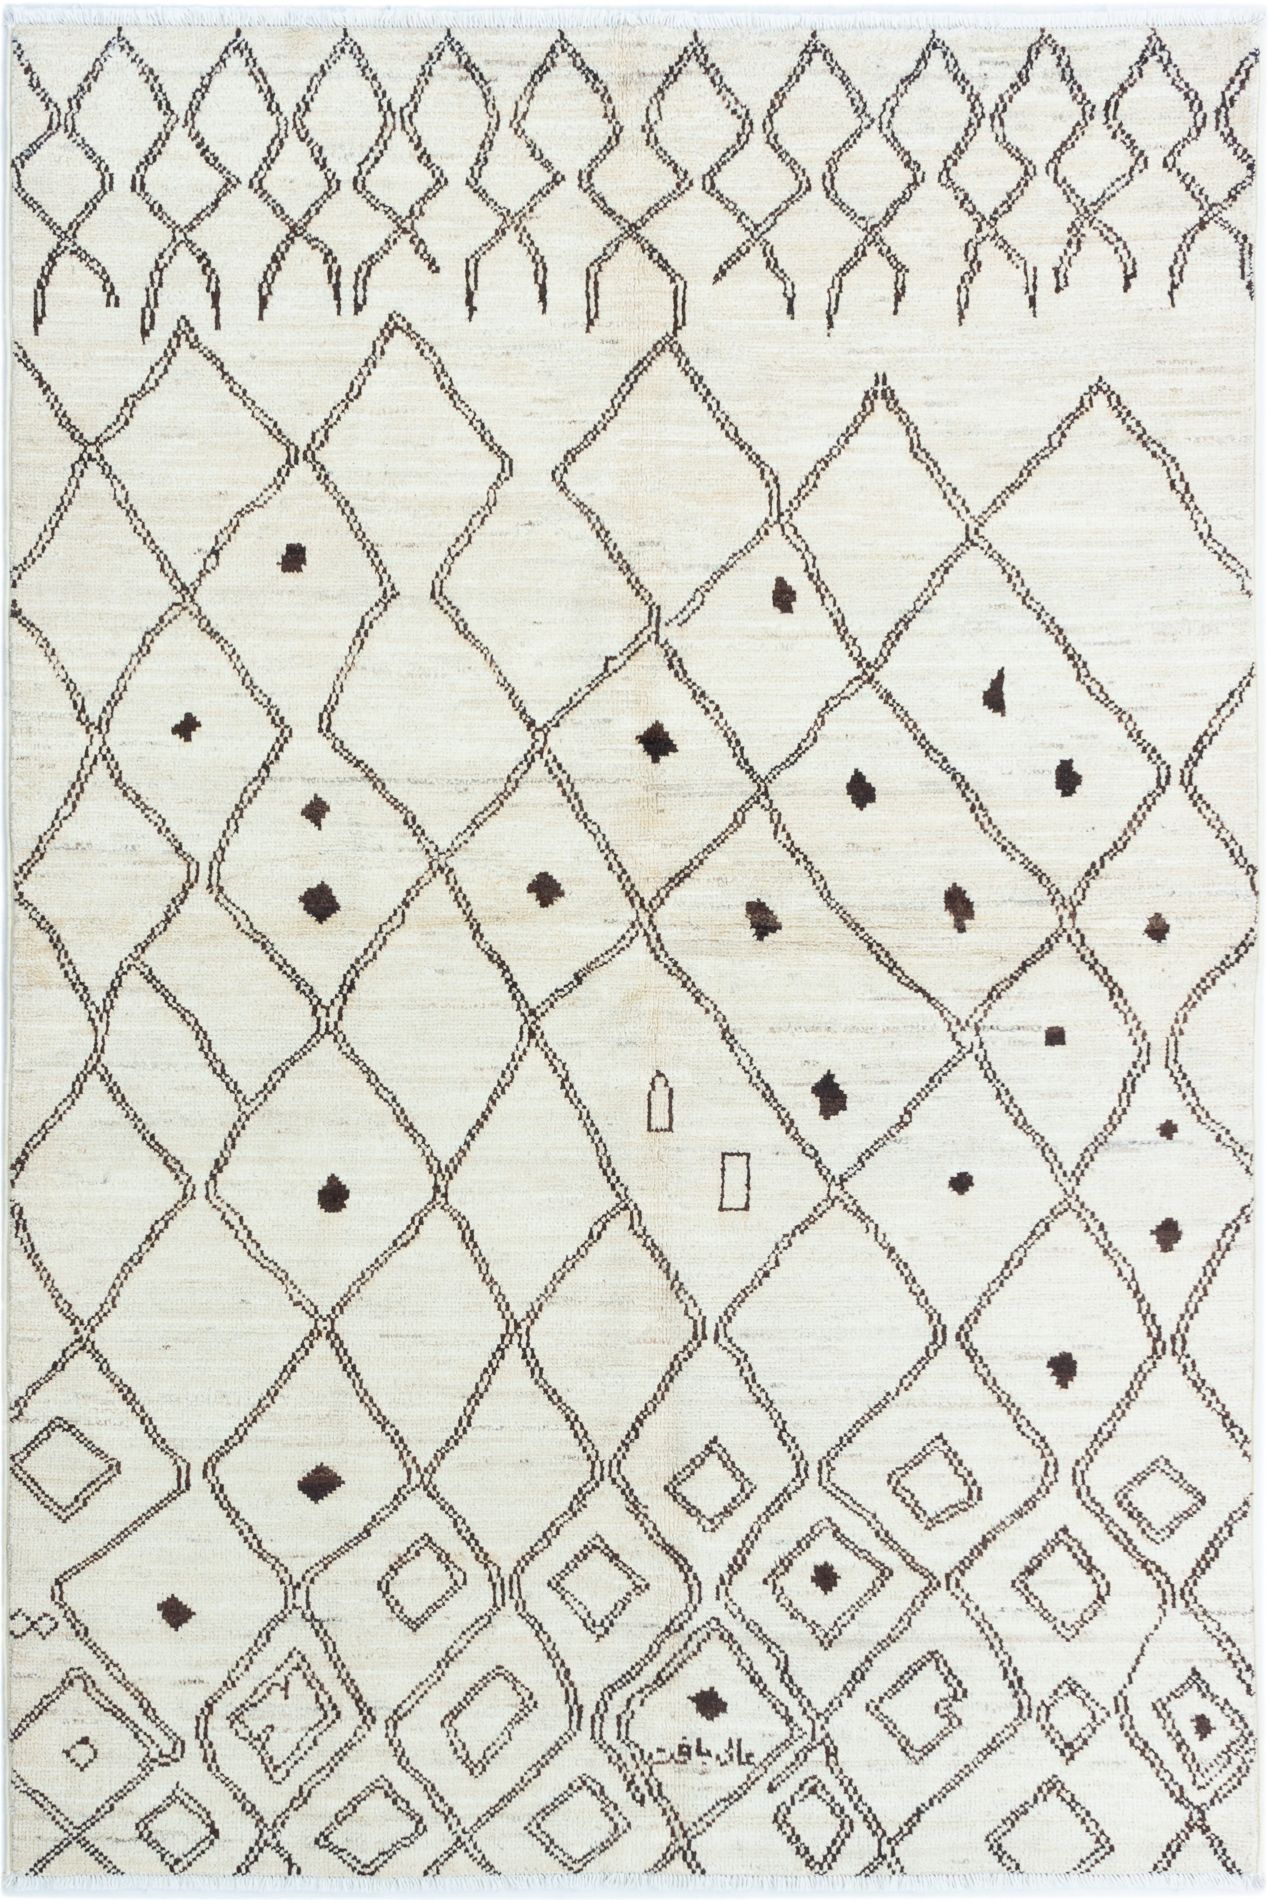 Hand-knotted Shalimar Cream Wool Rug 6'0" x 8'10"  Size: 6'0" x 8'10"  